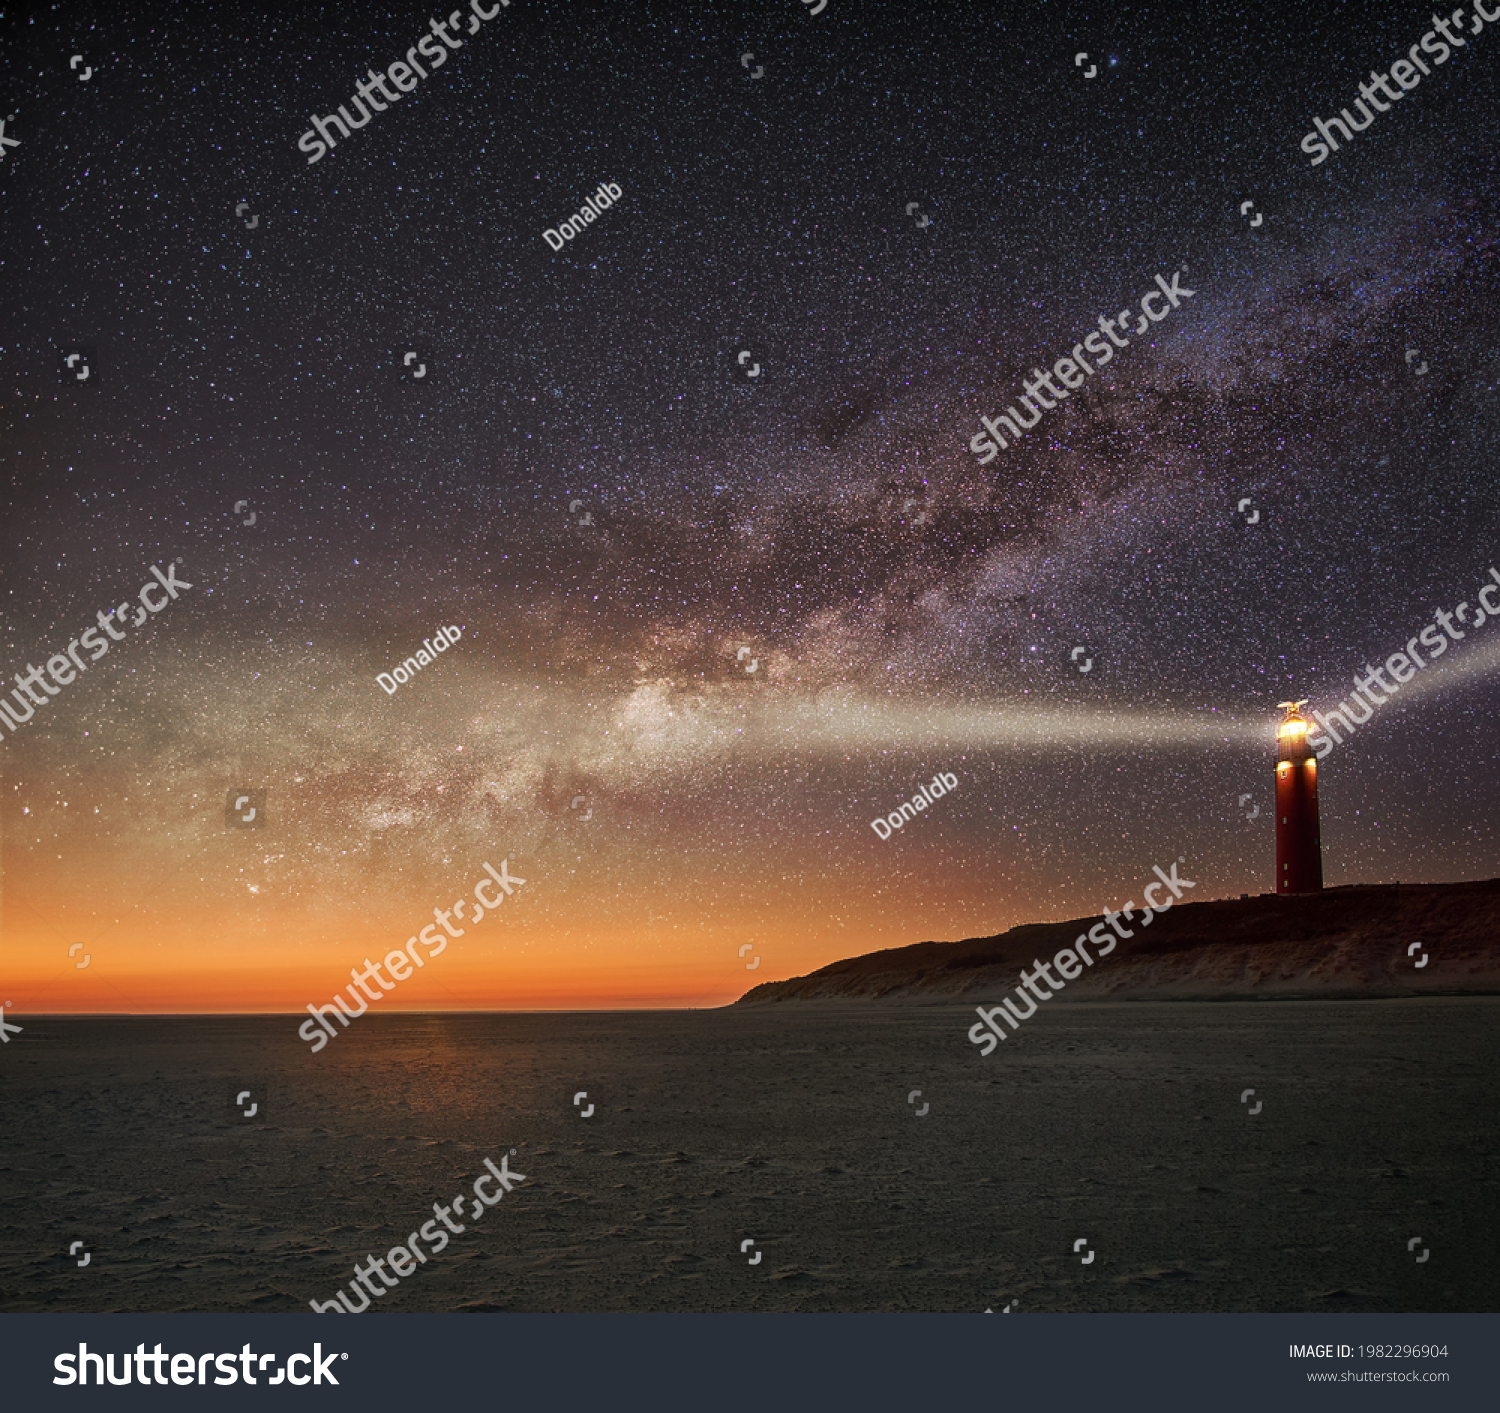 Night image of the Texel lighthouse serving as a navigation beacon for ships with starry nightsky with Milky way galactic core #1982296904